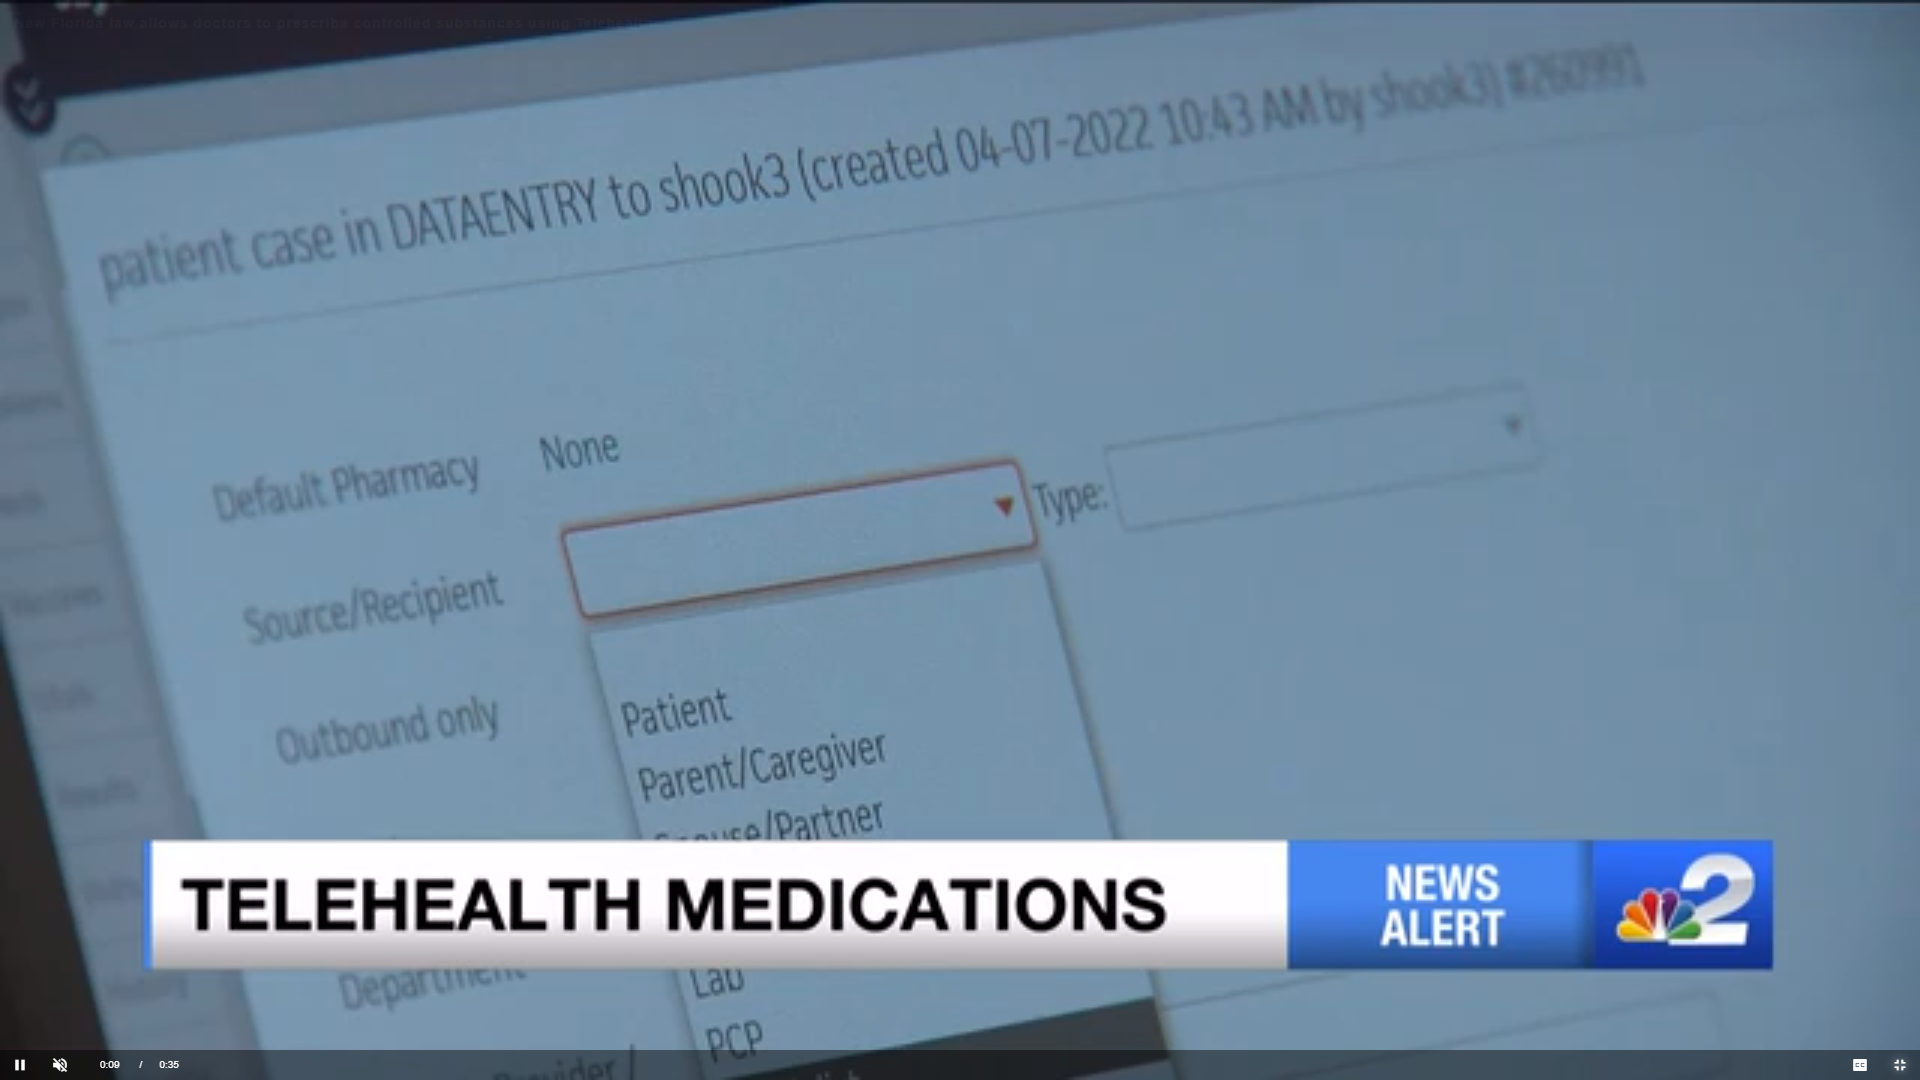 New Florida law allows doctors to prescribe controlled substances using